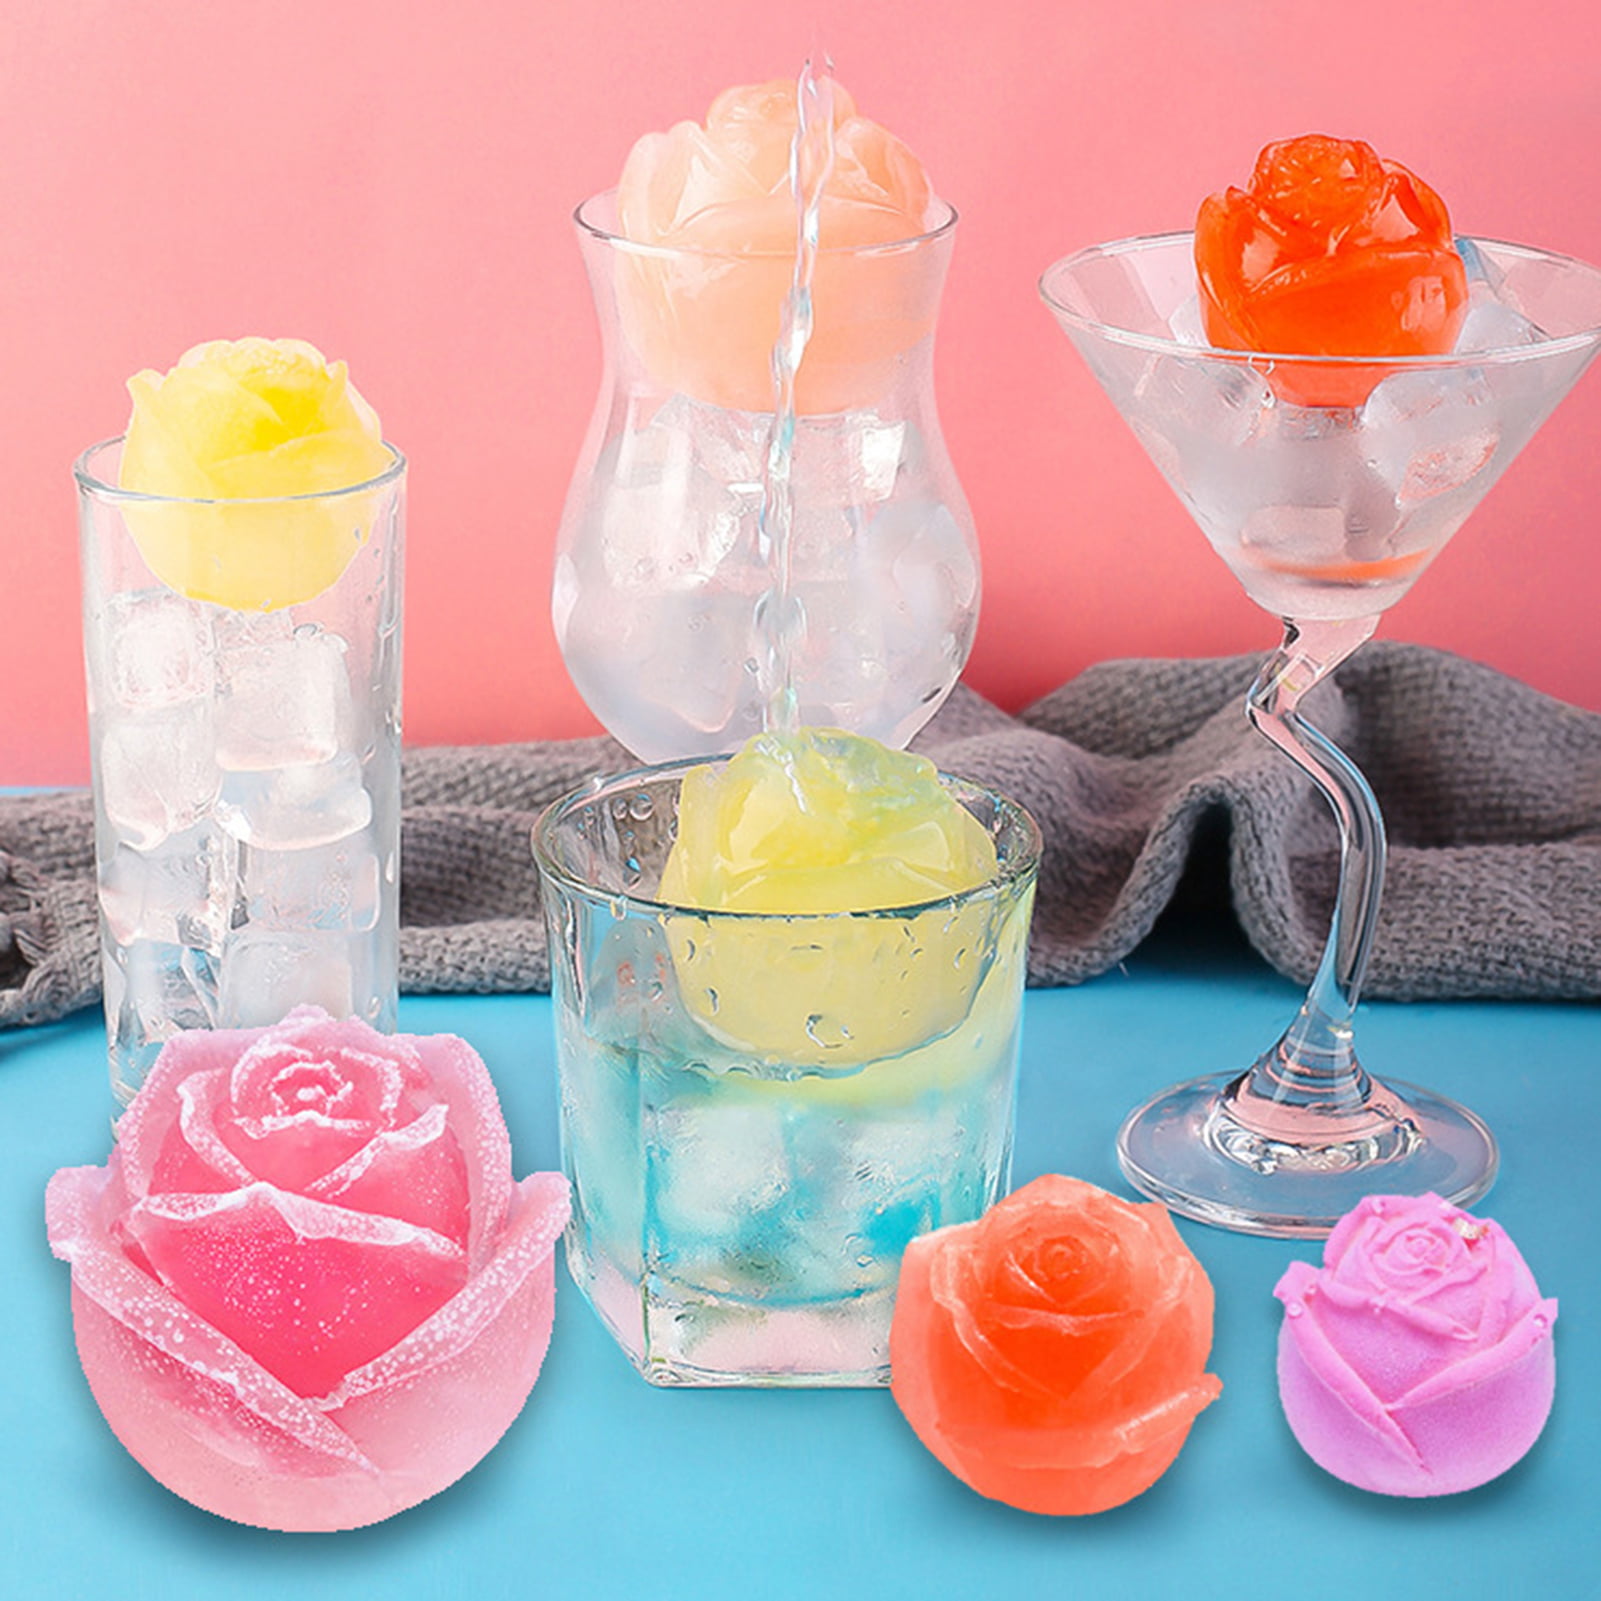  FUNBAKY Rose Flower Silicone Mold 6 Cavity Candy Chocolate Ice  Cube Jelly Cupcake Soap Cookie Mould : Home & Kitchen